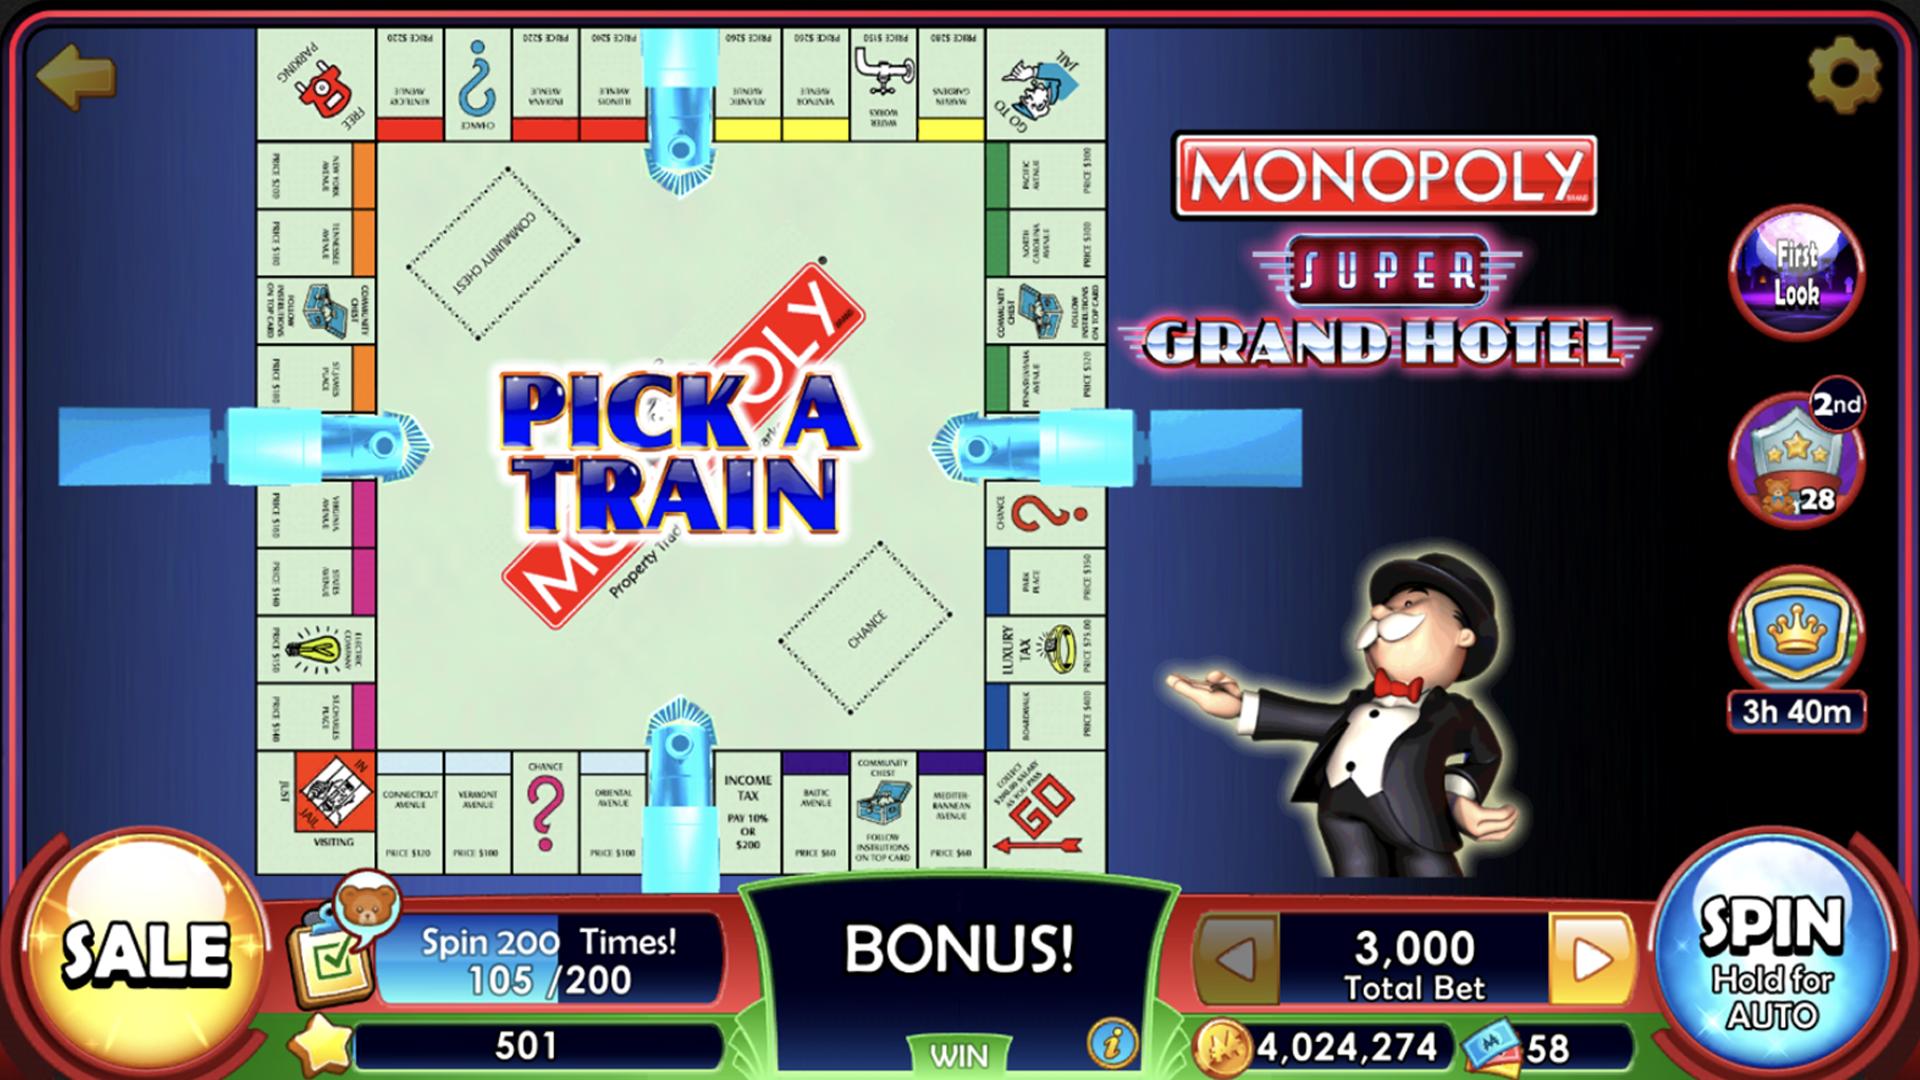 monopoly slots free coins 2019